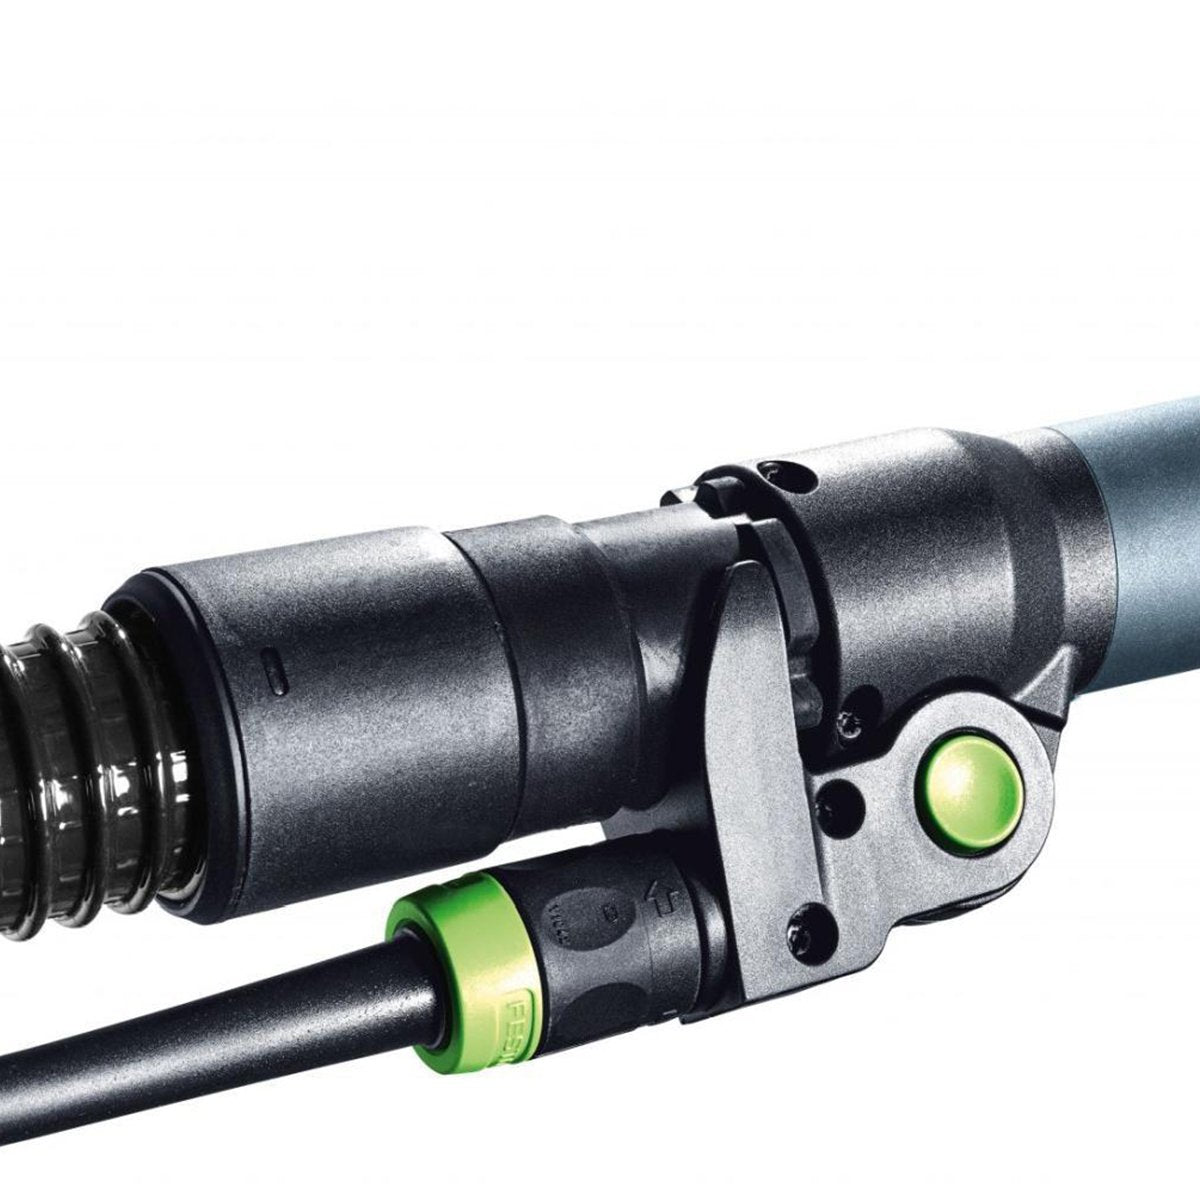 The detachable Plug-it power cable and D36 dust extraction hose physically locked to the end of the Planex Easy.